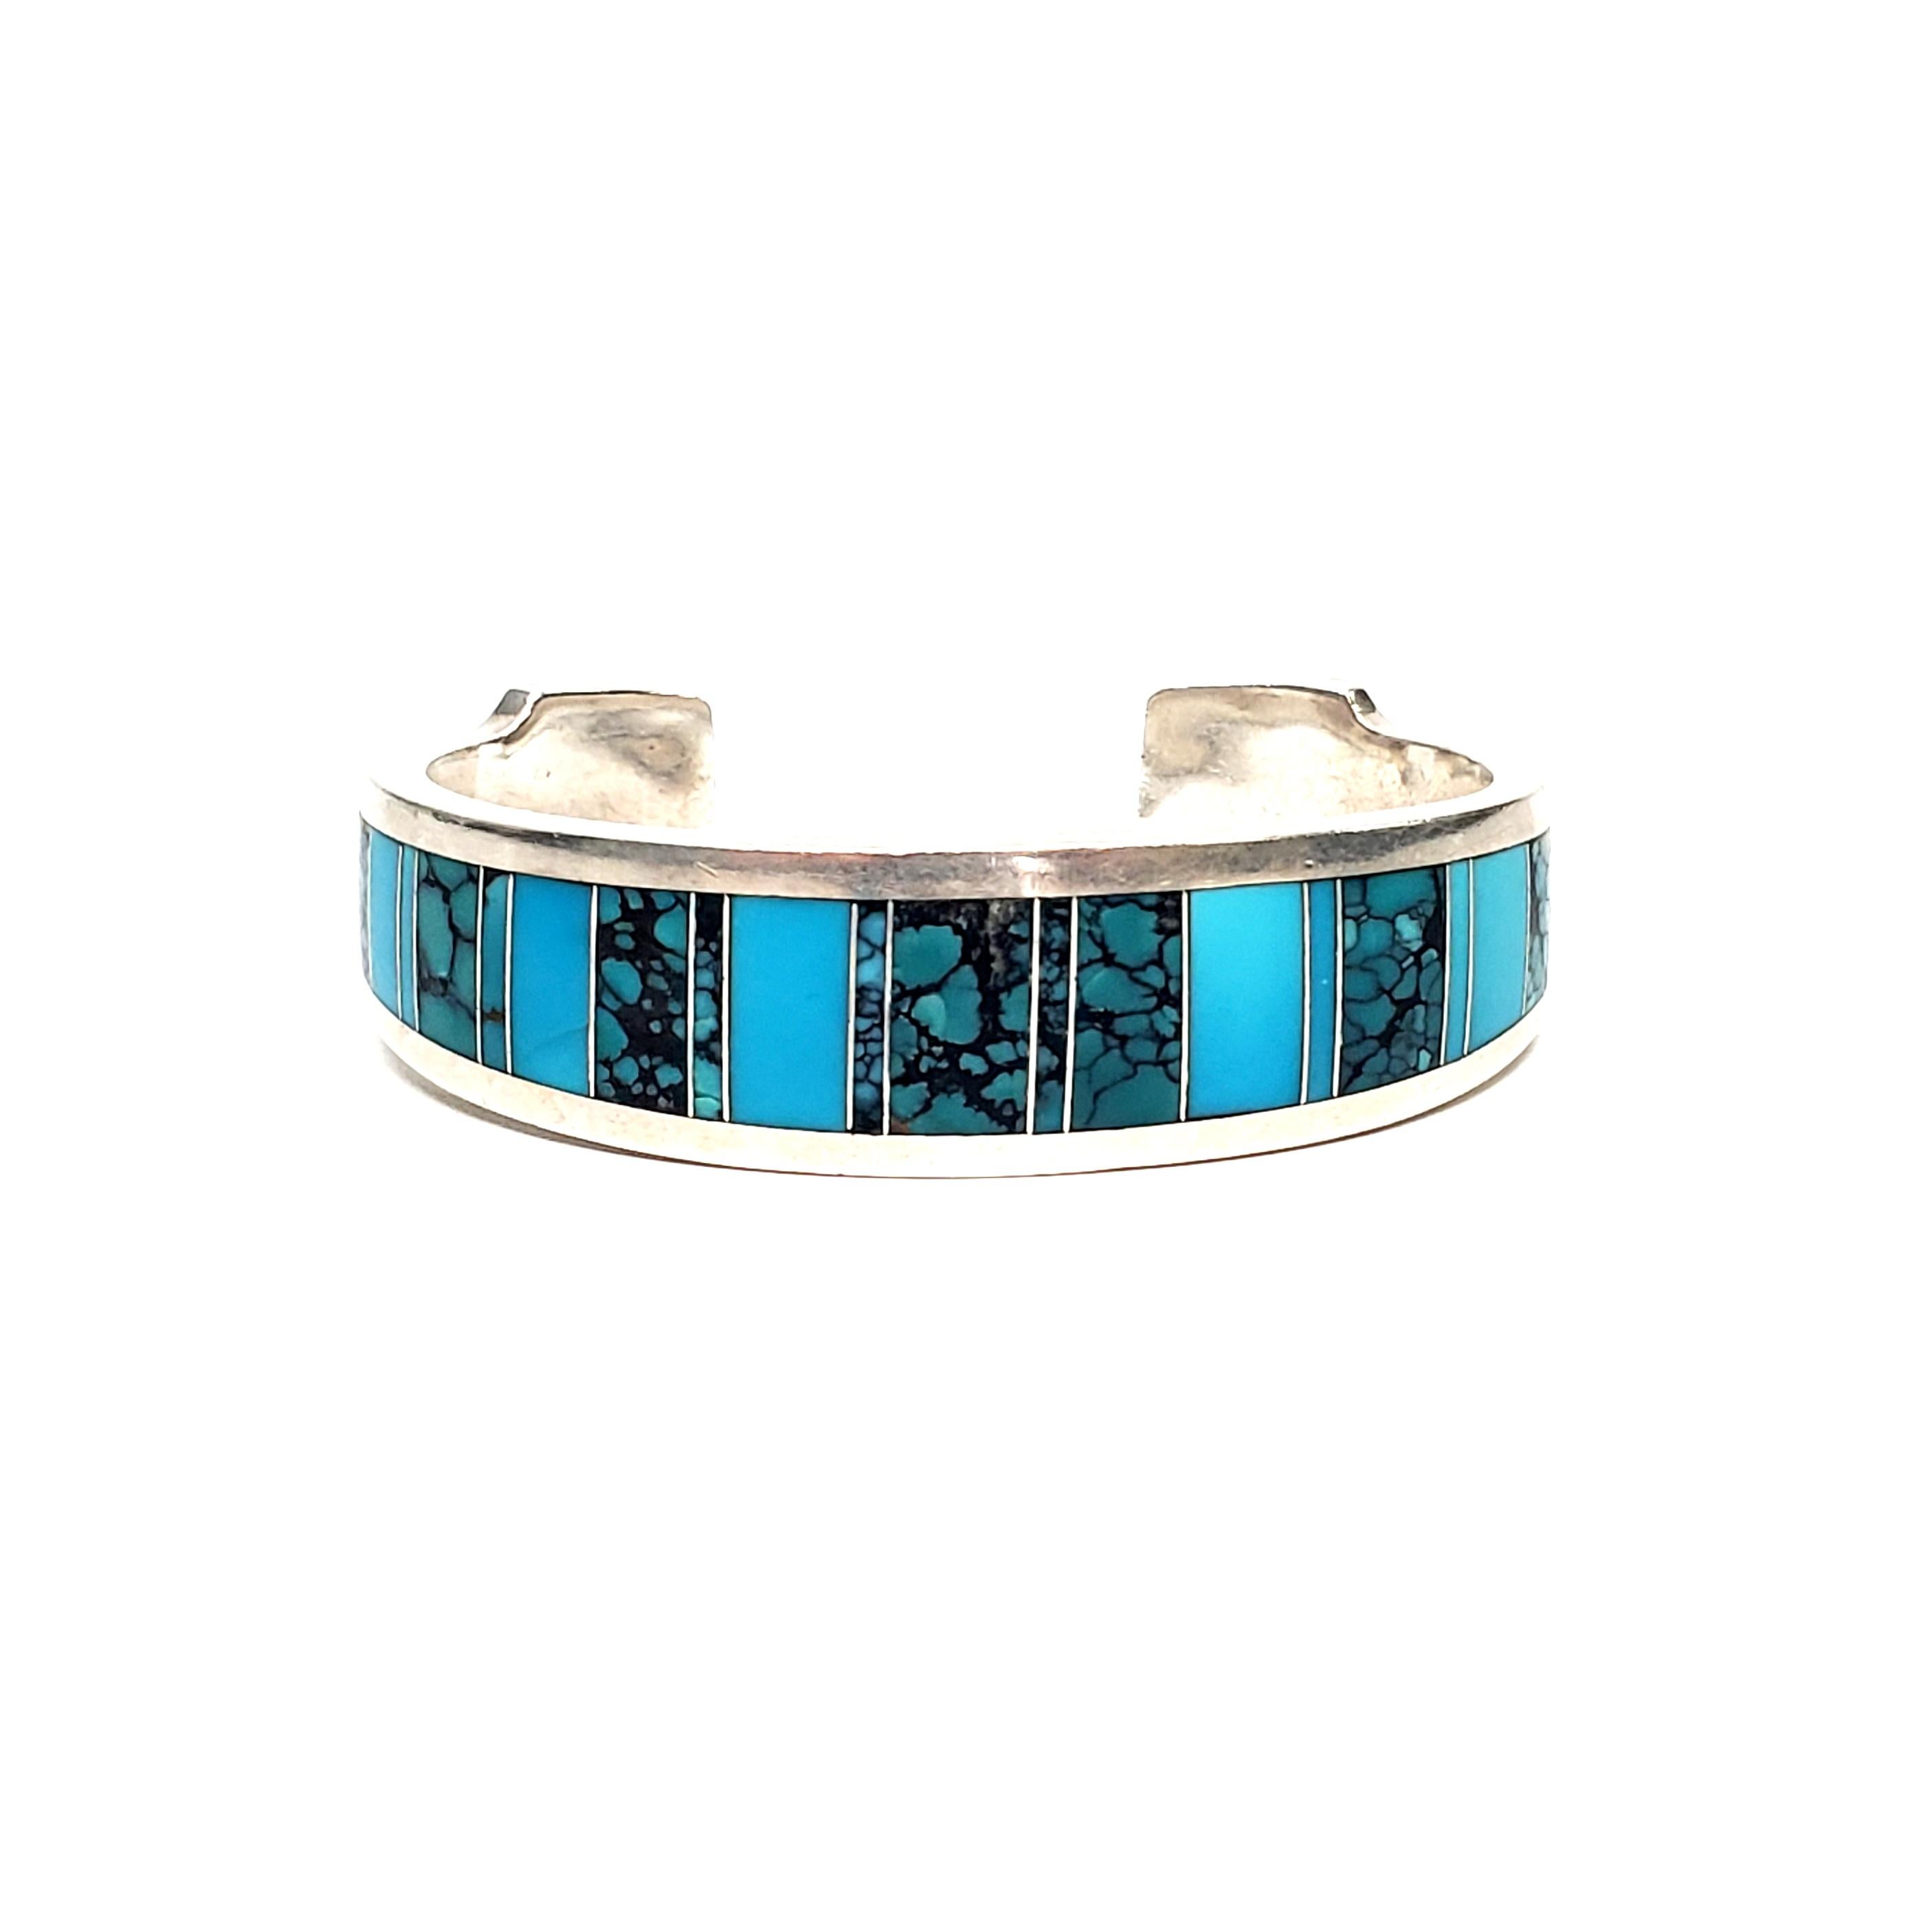 Sterling silver cuff bracelet by Native American Navajo artisan, Ray Tracey.

Beautiful inlaid turquoise, alternating between blue turquoise and veined turquoise.

Measures approx 5 3/4